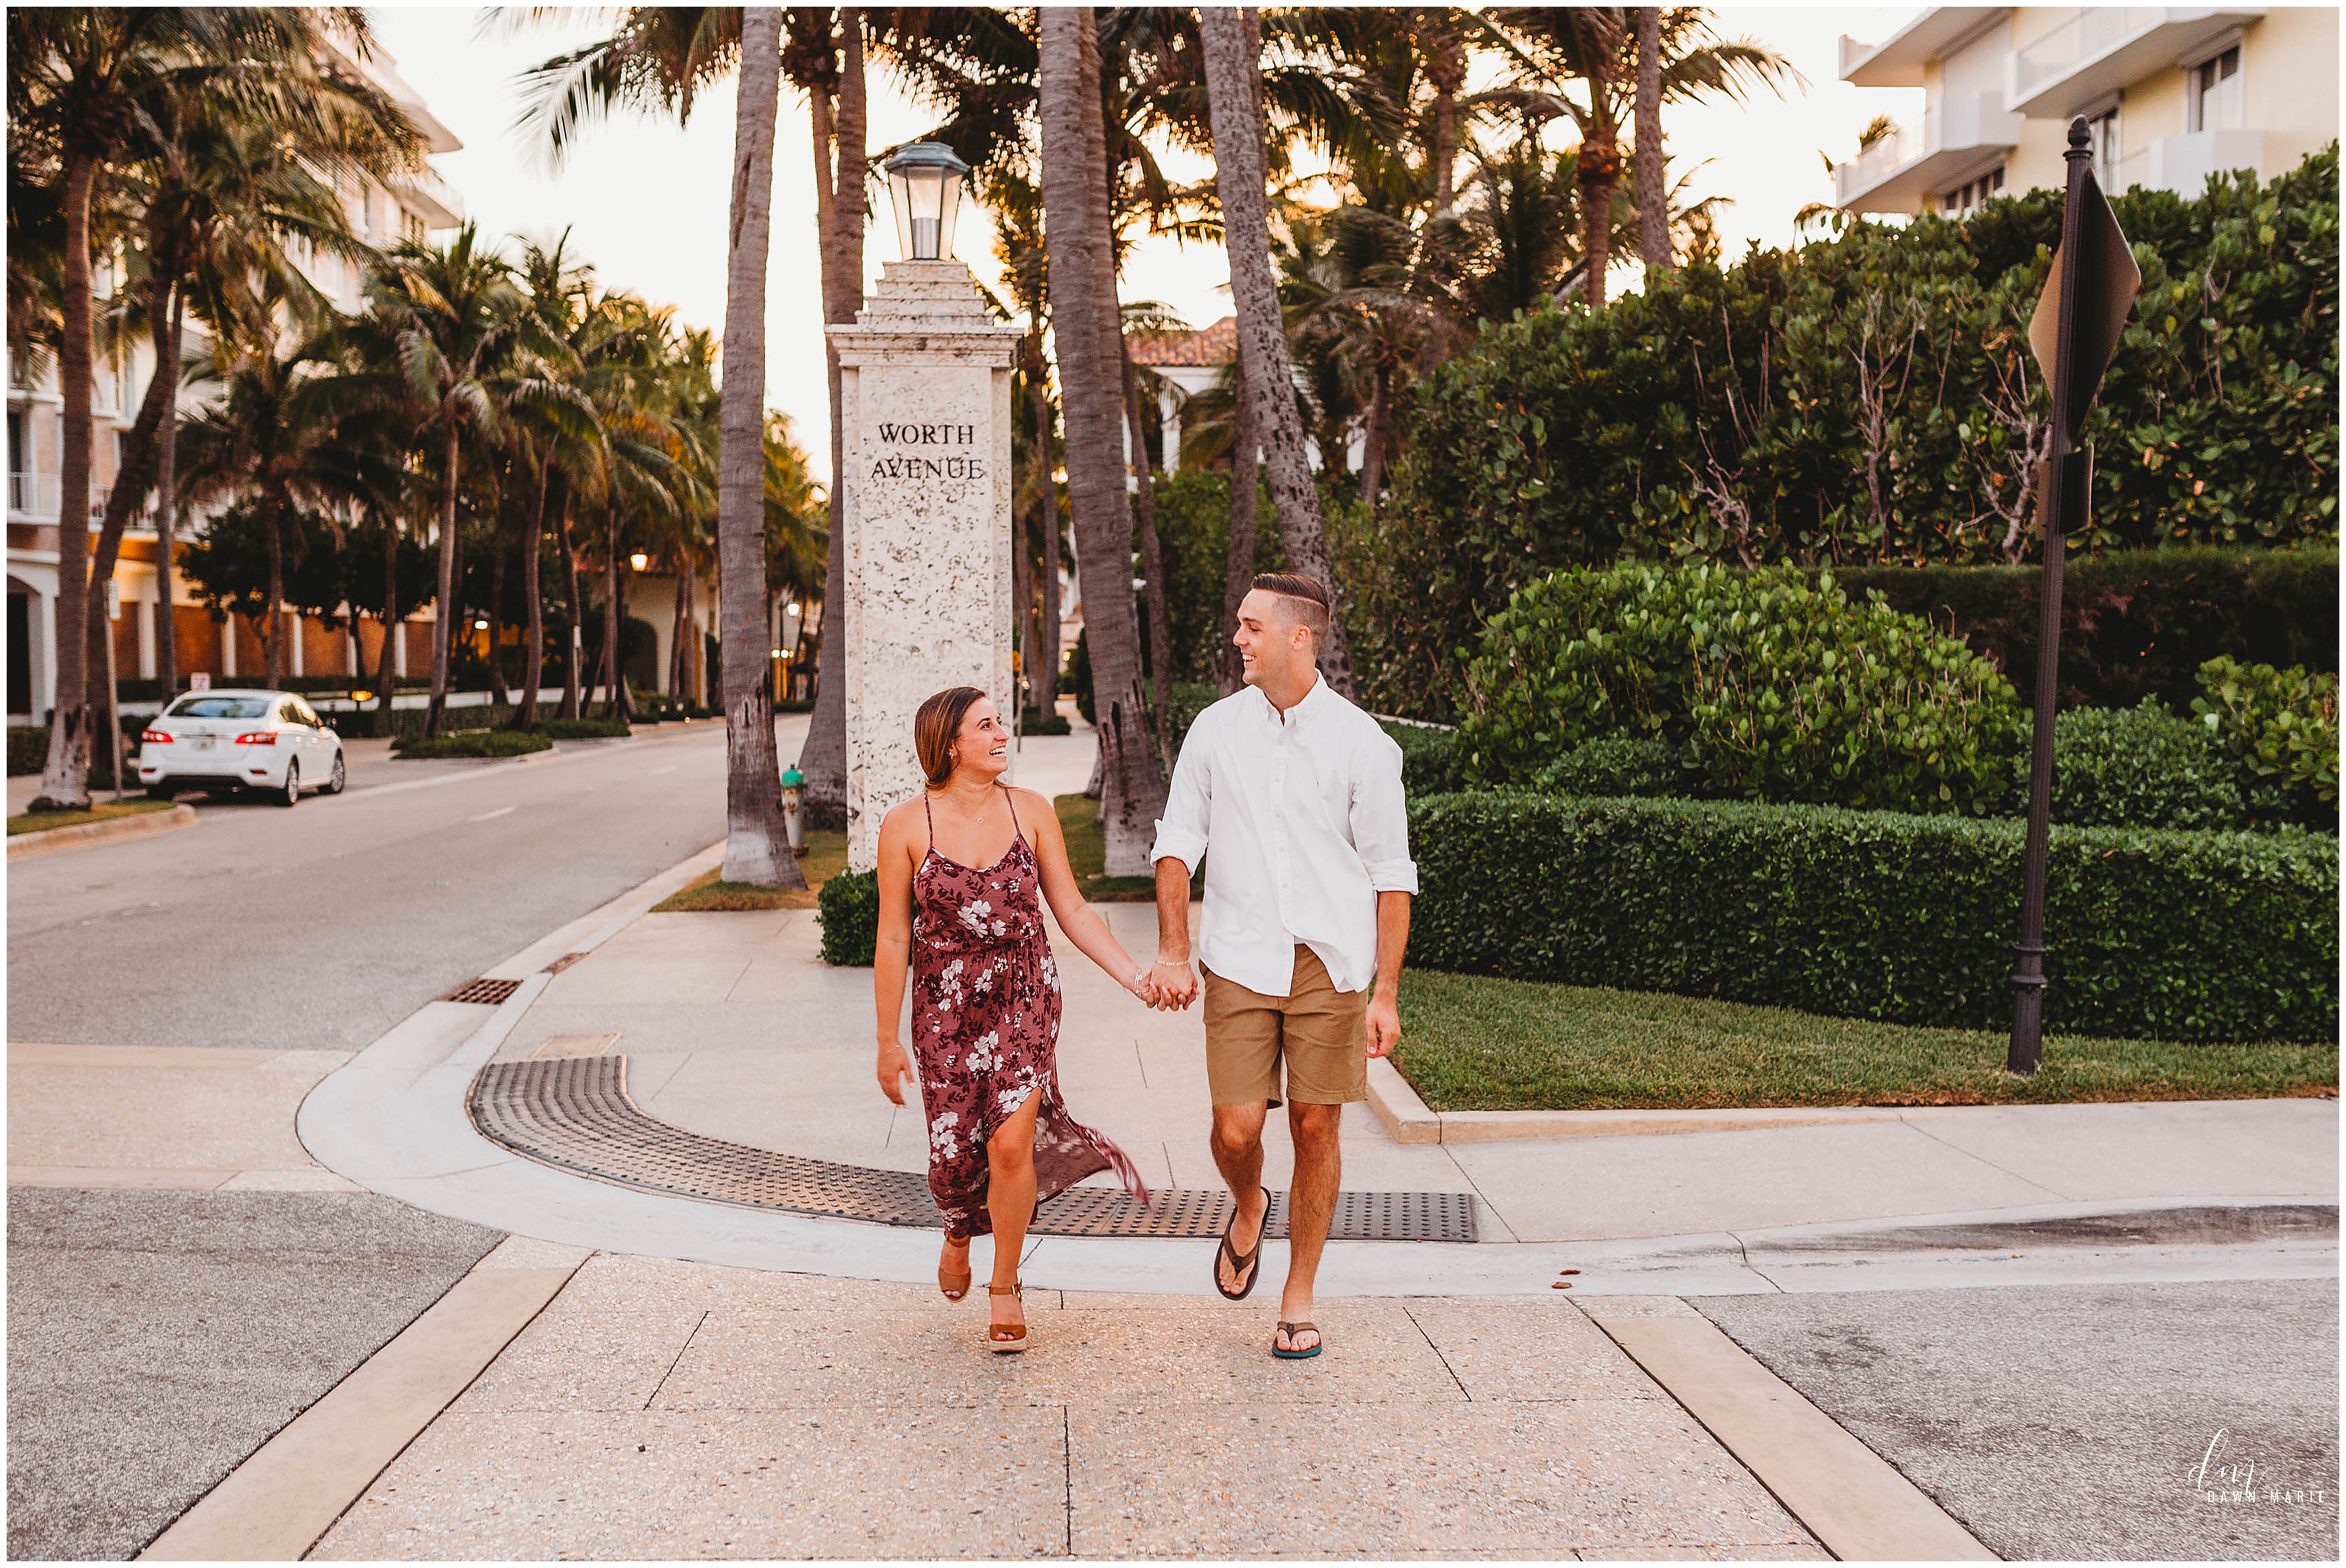 South florida Engagement Photography, South florida Engagement Photographer, South florida Engagement Photos, FL engagement Photographer, Palm Beach FL Engagement Photographer, engagement locations in South florida, engagement photography, engagement photography inspiration, engagement photos, Palm Beach Island Florida engagement photography, Palm Beach Engagement Photographer, Worth Avenue Engagement Photos, Worth Avenue Palm Beach, Worth Ave Palm Beach Engagement, worth avenue engagement